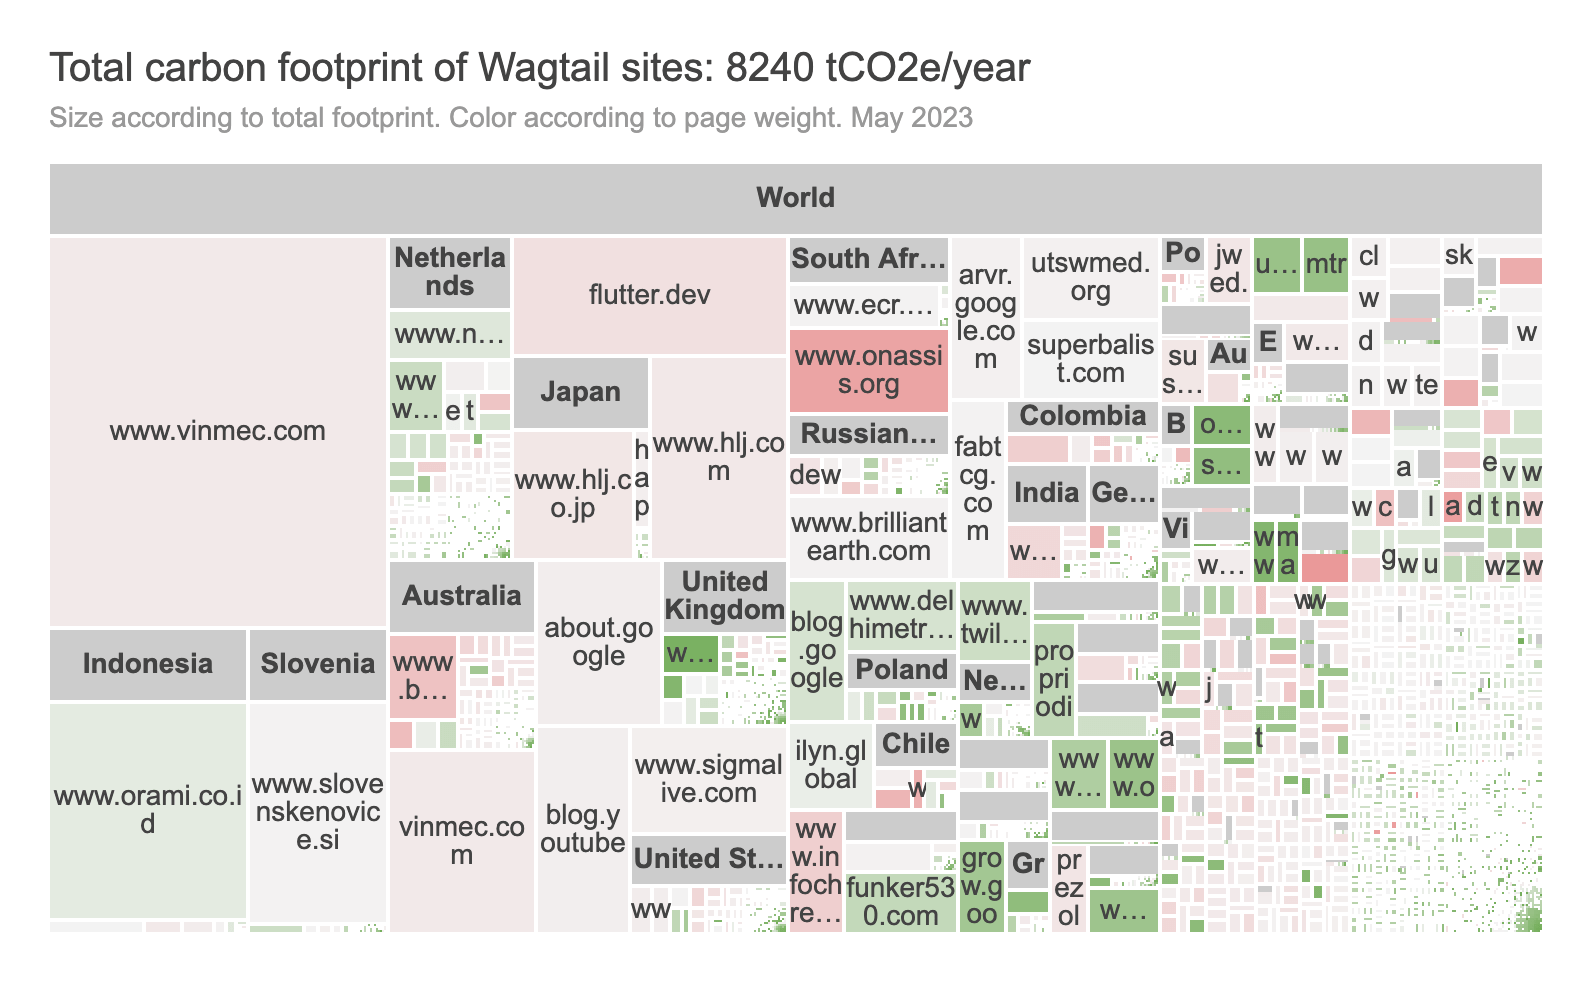 Total carbon footprint of Wagtail sites as a treemap - 8240 tCO2e per year